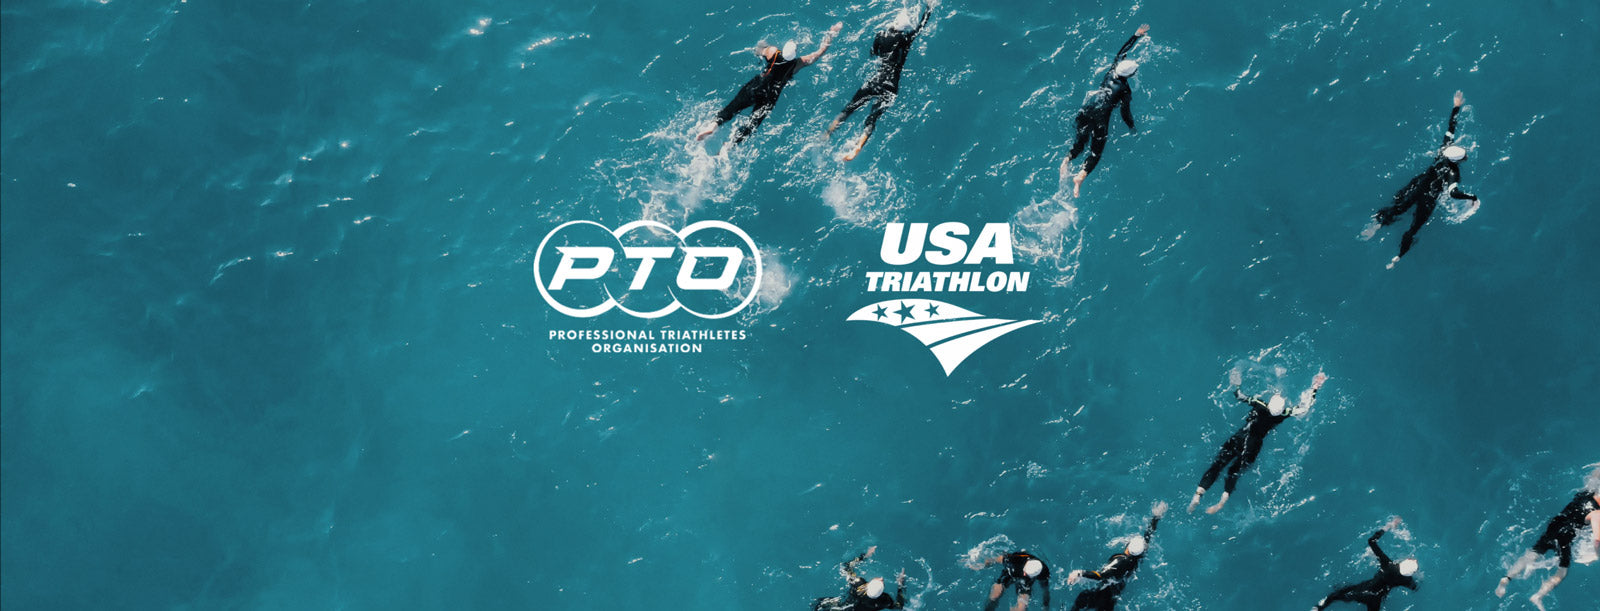 Form is an OFFICIAL PARTNER of the USA Triathlon and Professional triathlete Organization.